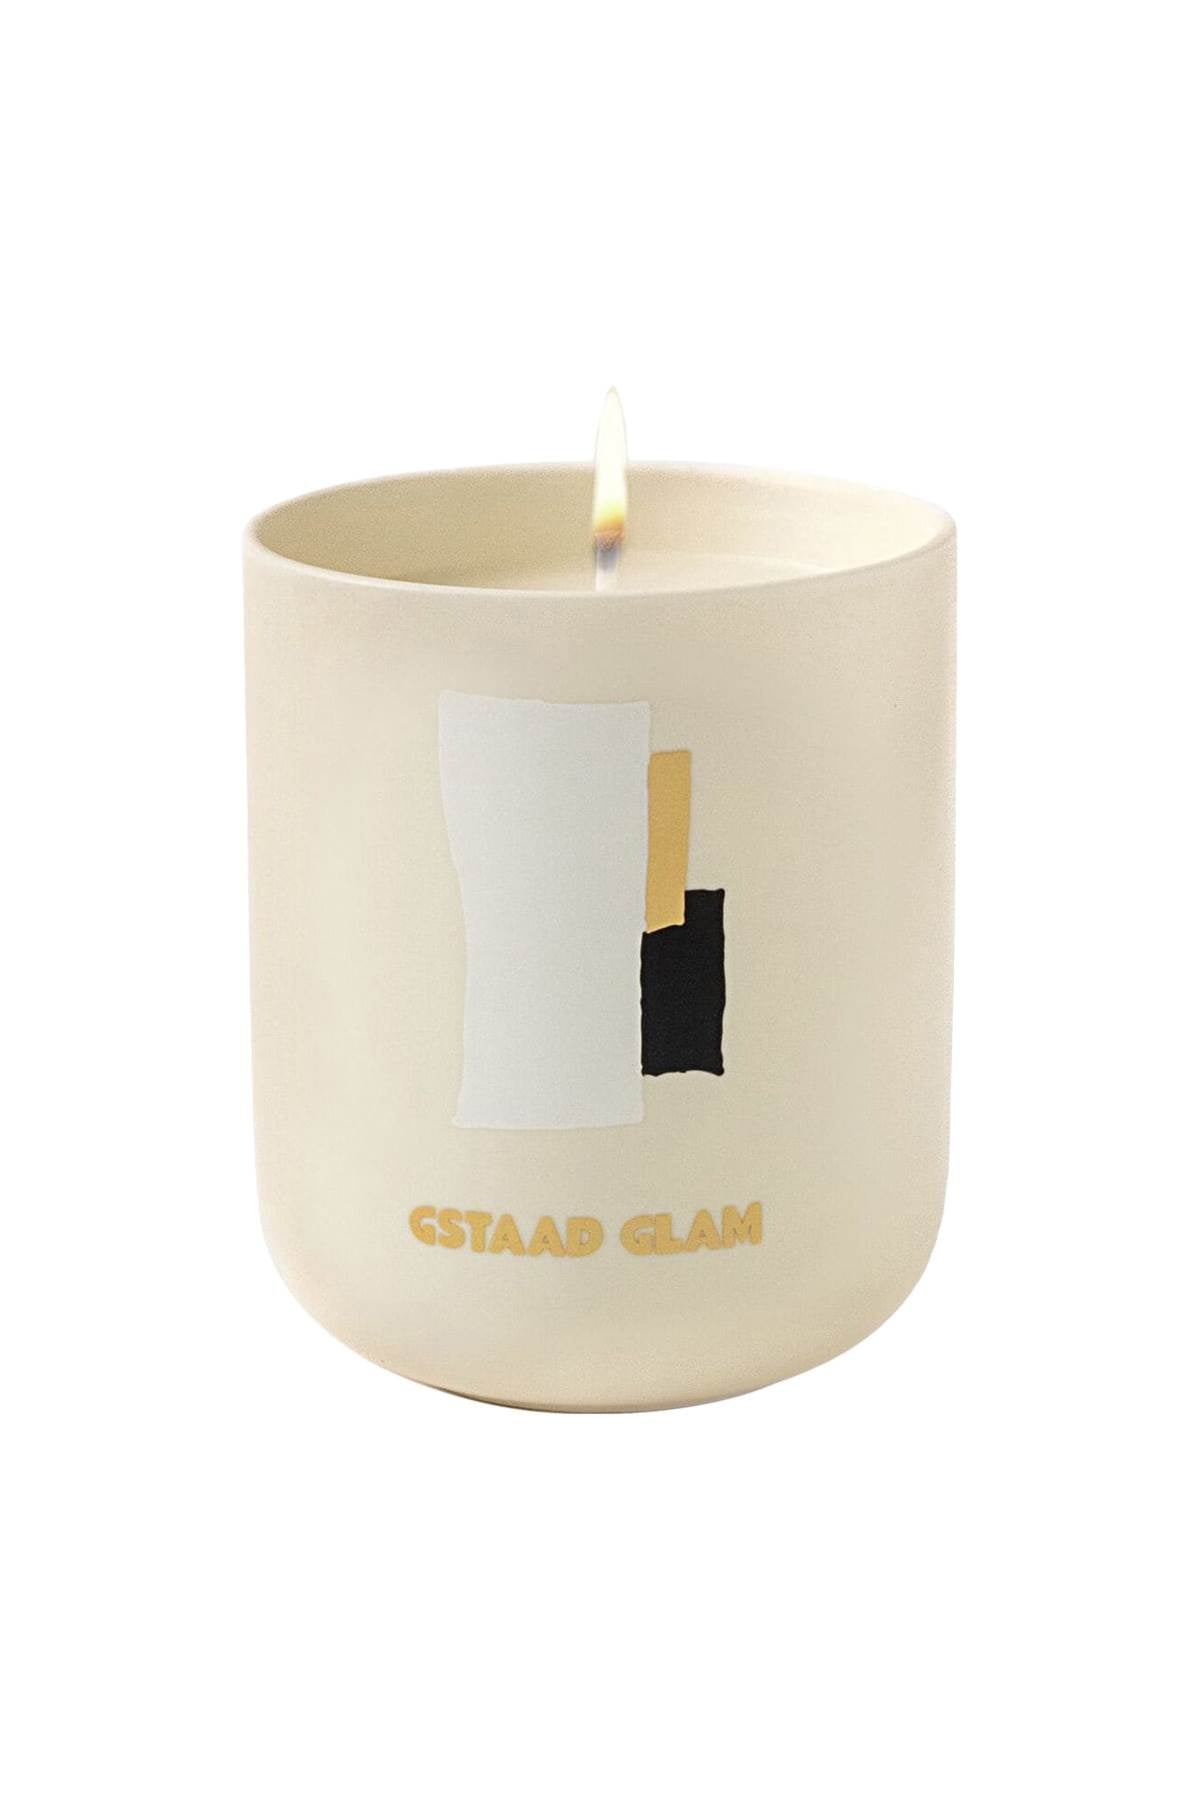 Assouline gstaad glam scented candle-0